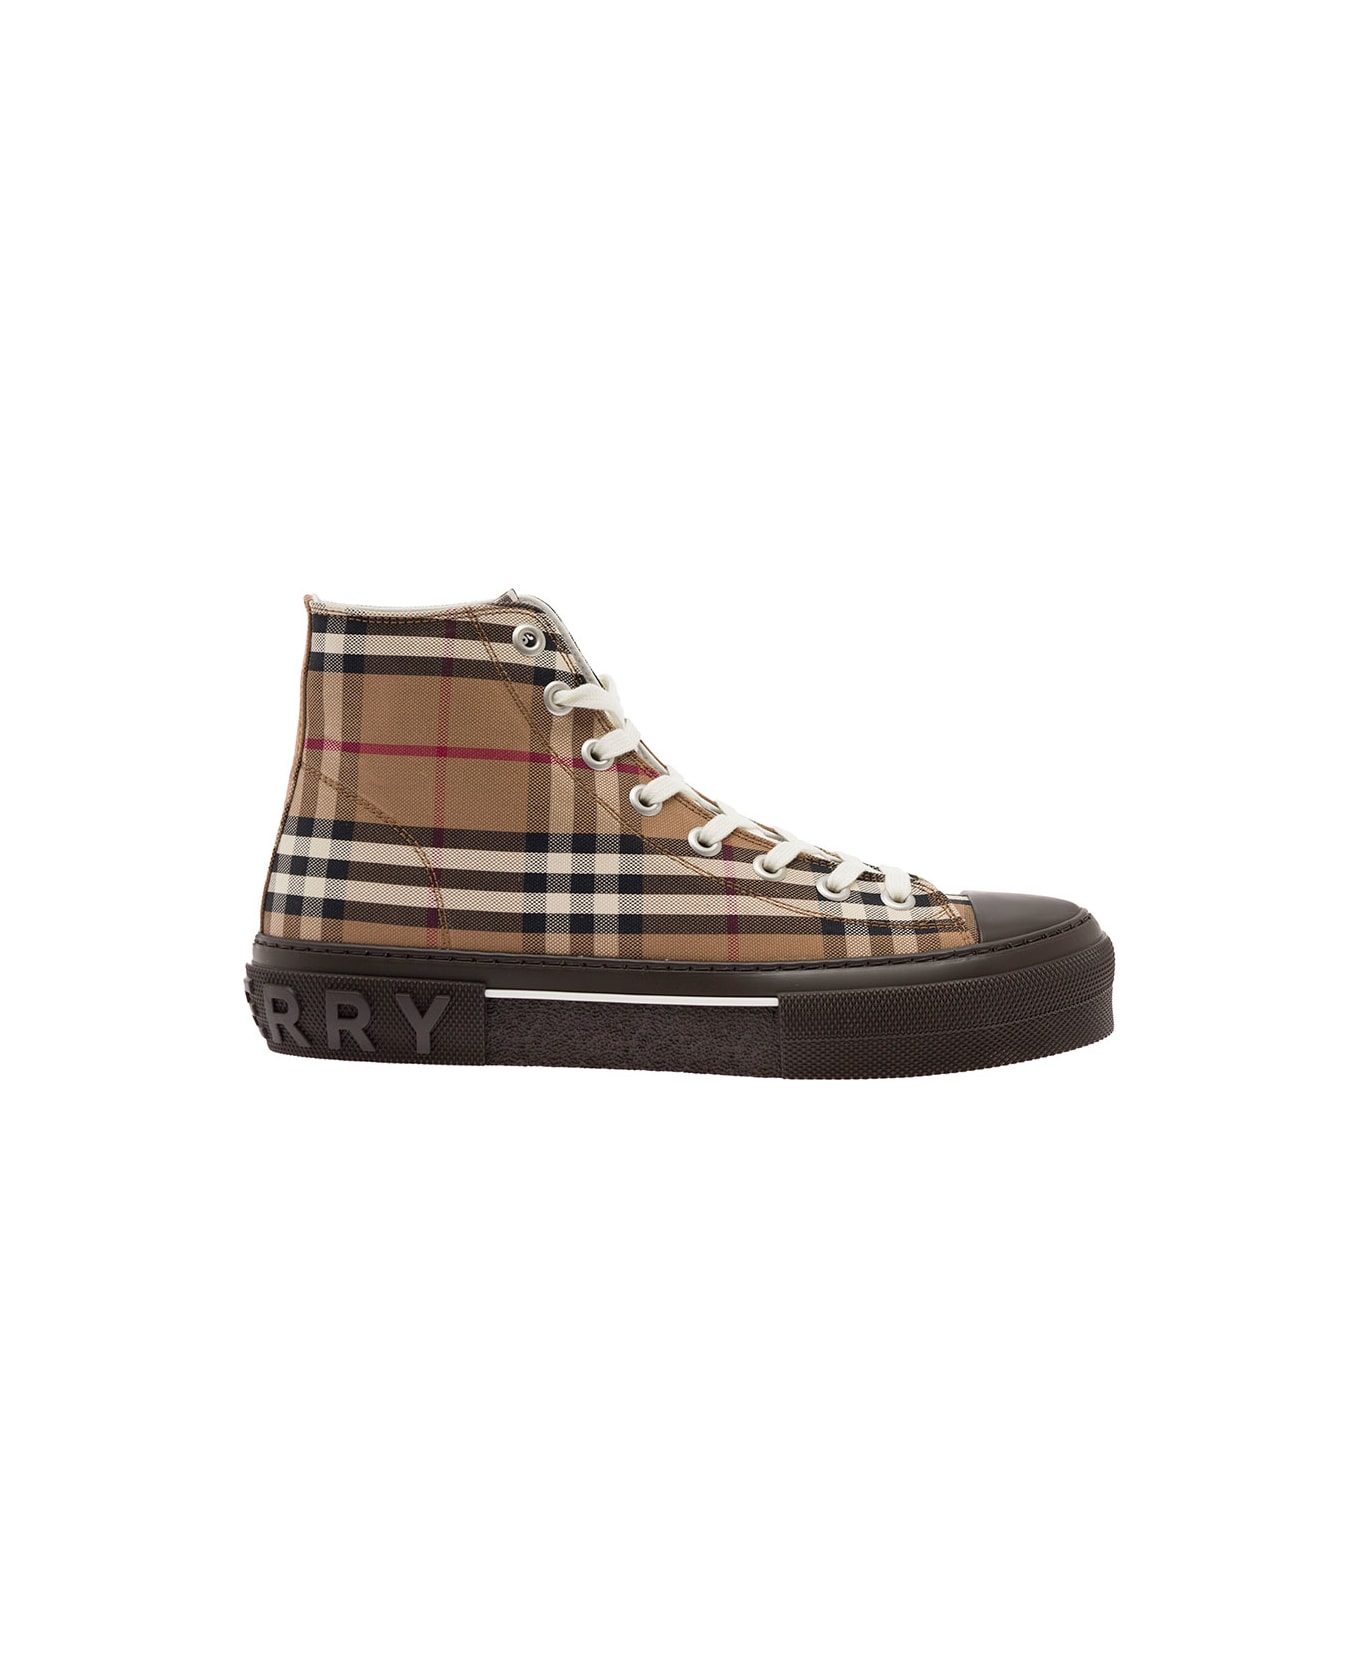 Burberry Brown High-top Sneakers With Vintage Check Motif All Over In Cotton - Beige